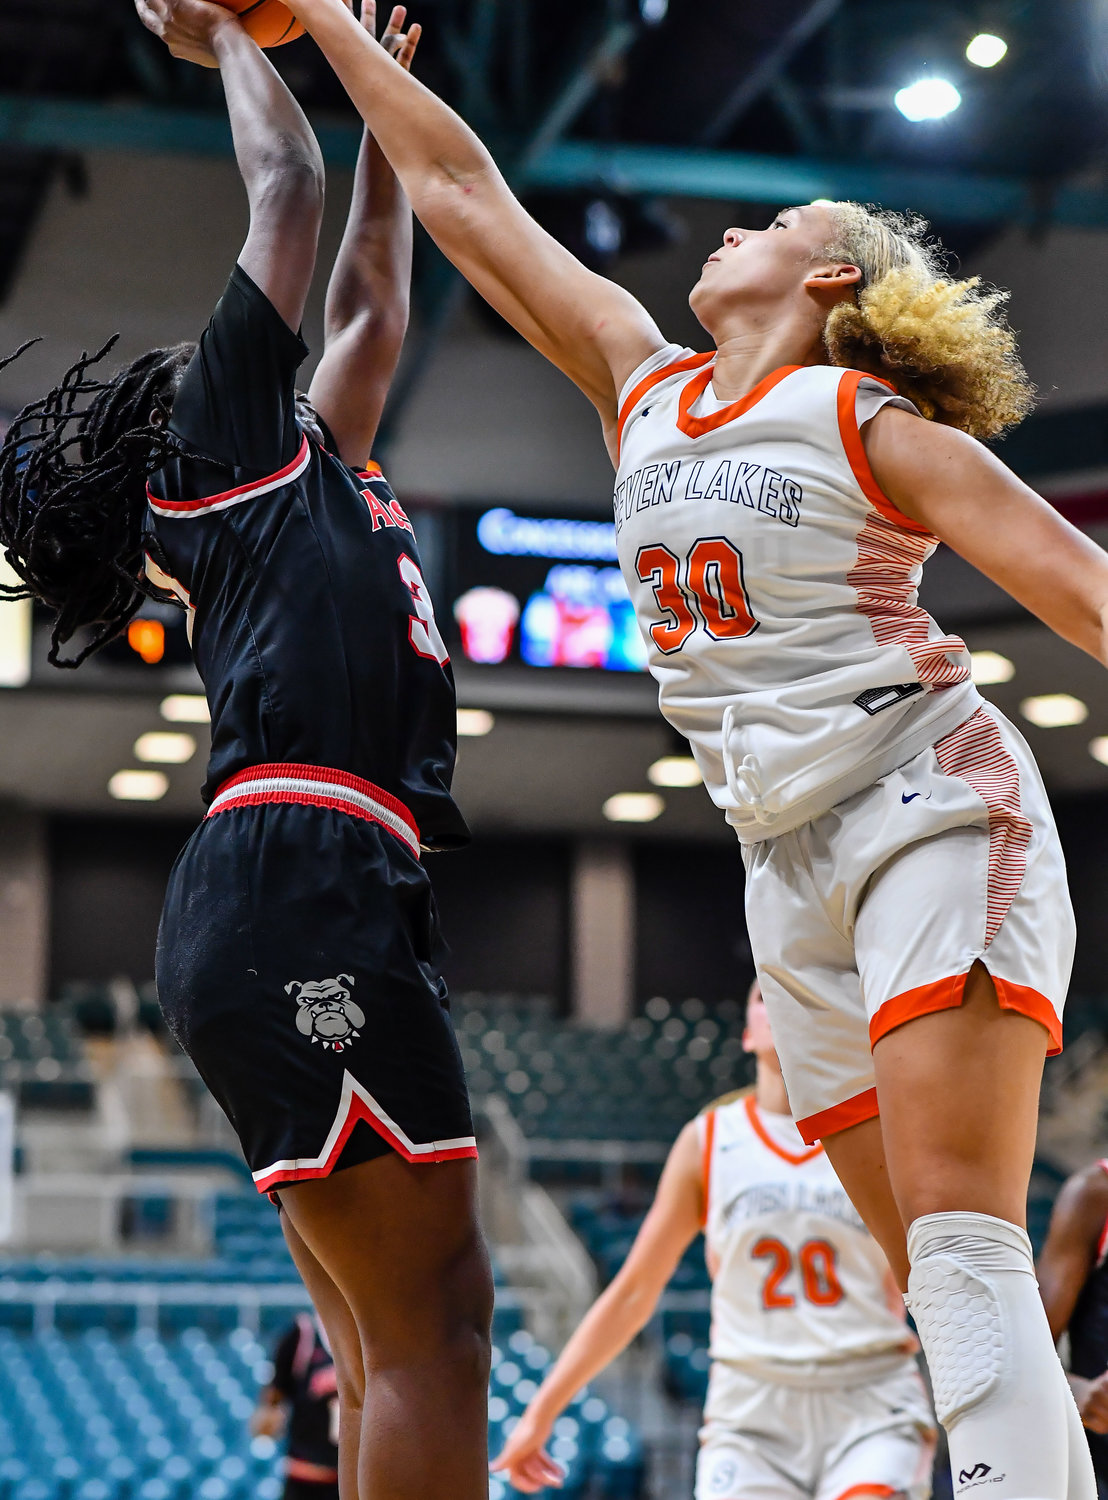 Katy Tx. Feb 22, 2022:  Seven Lakes Justice Carlton #30 gets the block on a shot by Fort Bend Austins India Jackson #30 during the Regional Quarterfinal playoff game, Seven Lakes vs Fort Bend Austin at the Merrell Center. (Photo by Mark Goodman / Katy Times)